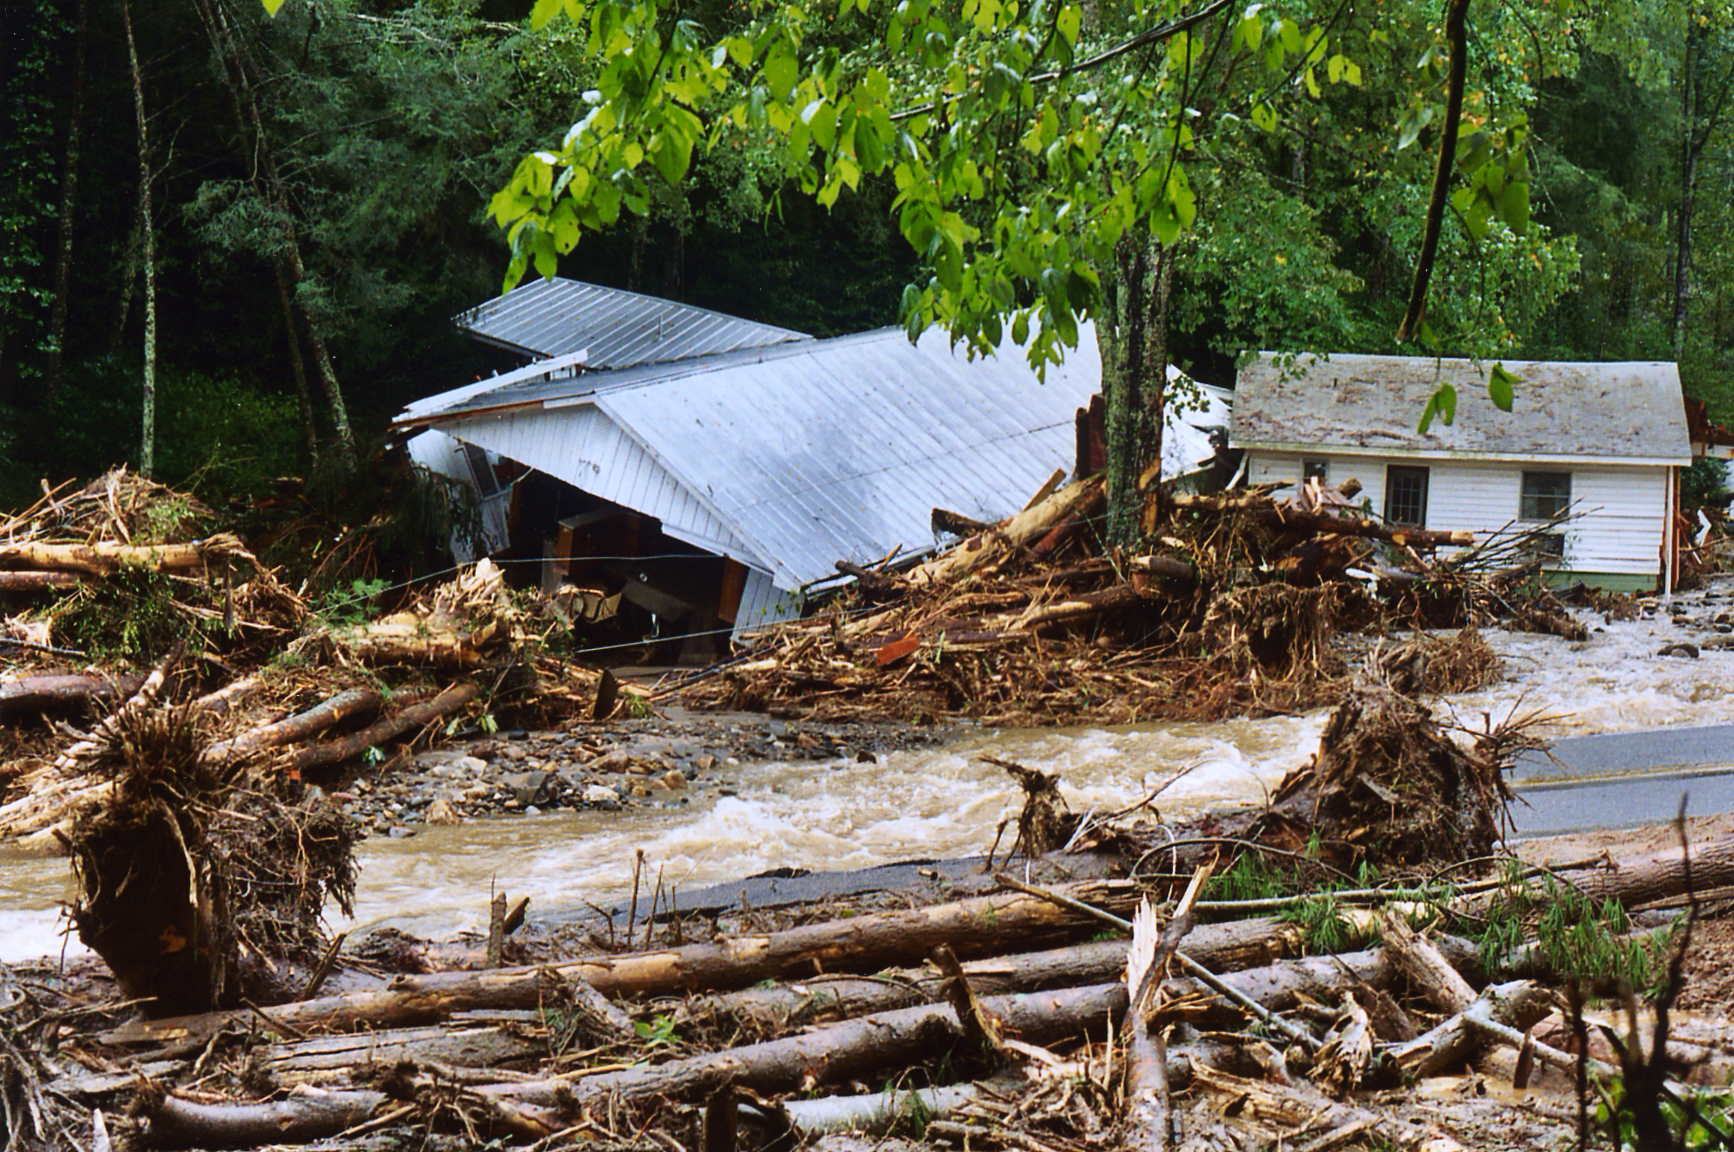 Photograph of a house in North Carolina destroyed by a landslide.